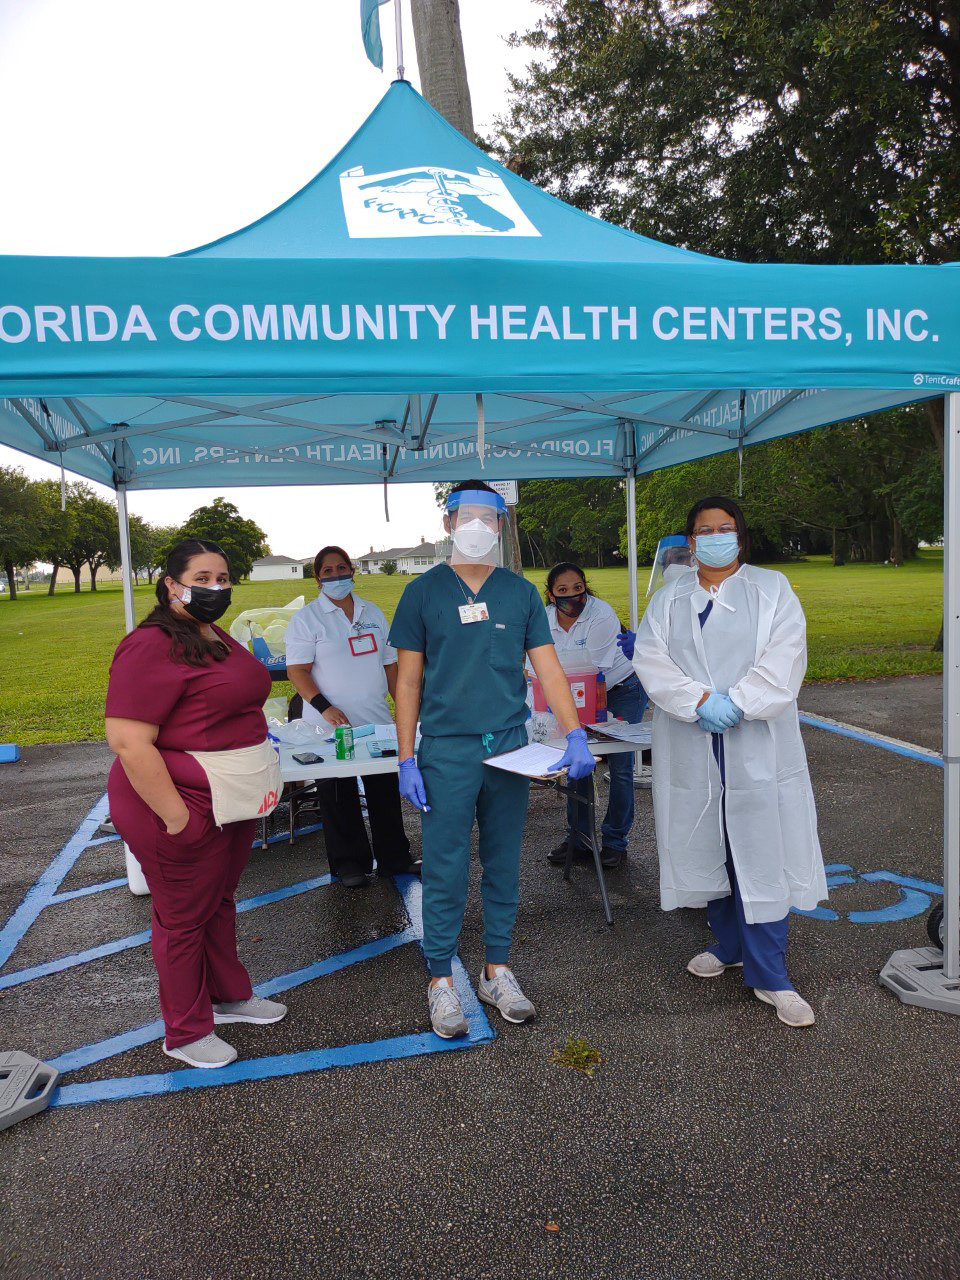 COVID-19 vaccinations were available at the FCHC's "Back to School" event at the John Boy Auditorium. From left to right: Cindy Canales, Patricia Caseres (Nursing Supervisor), Gustavo Guerra, Maricela Rivera and Dr. Webster.